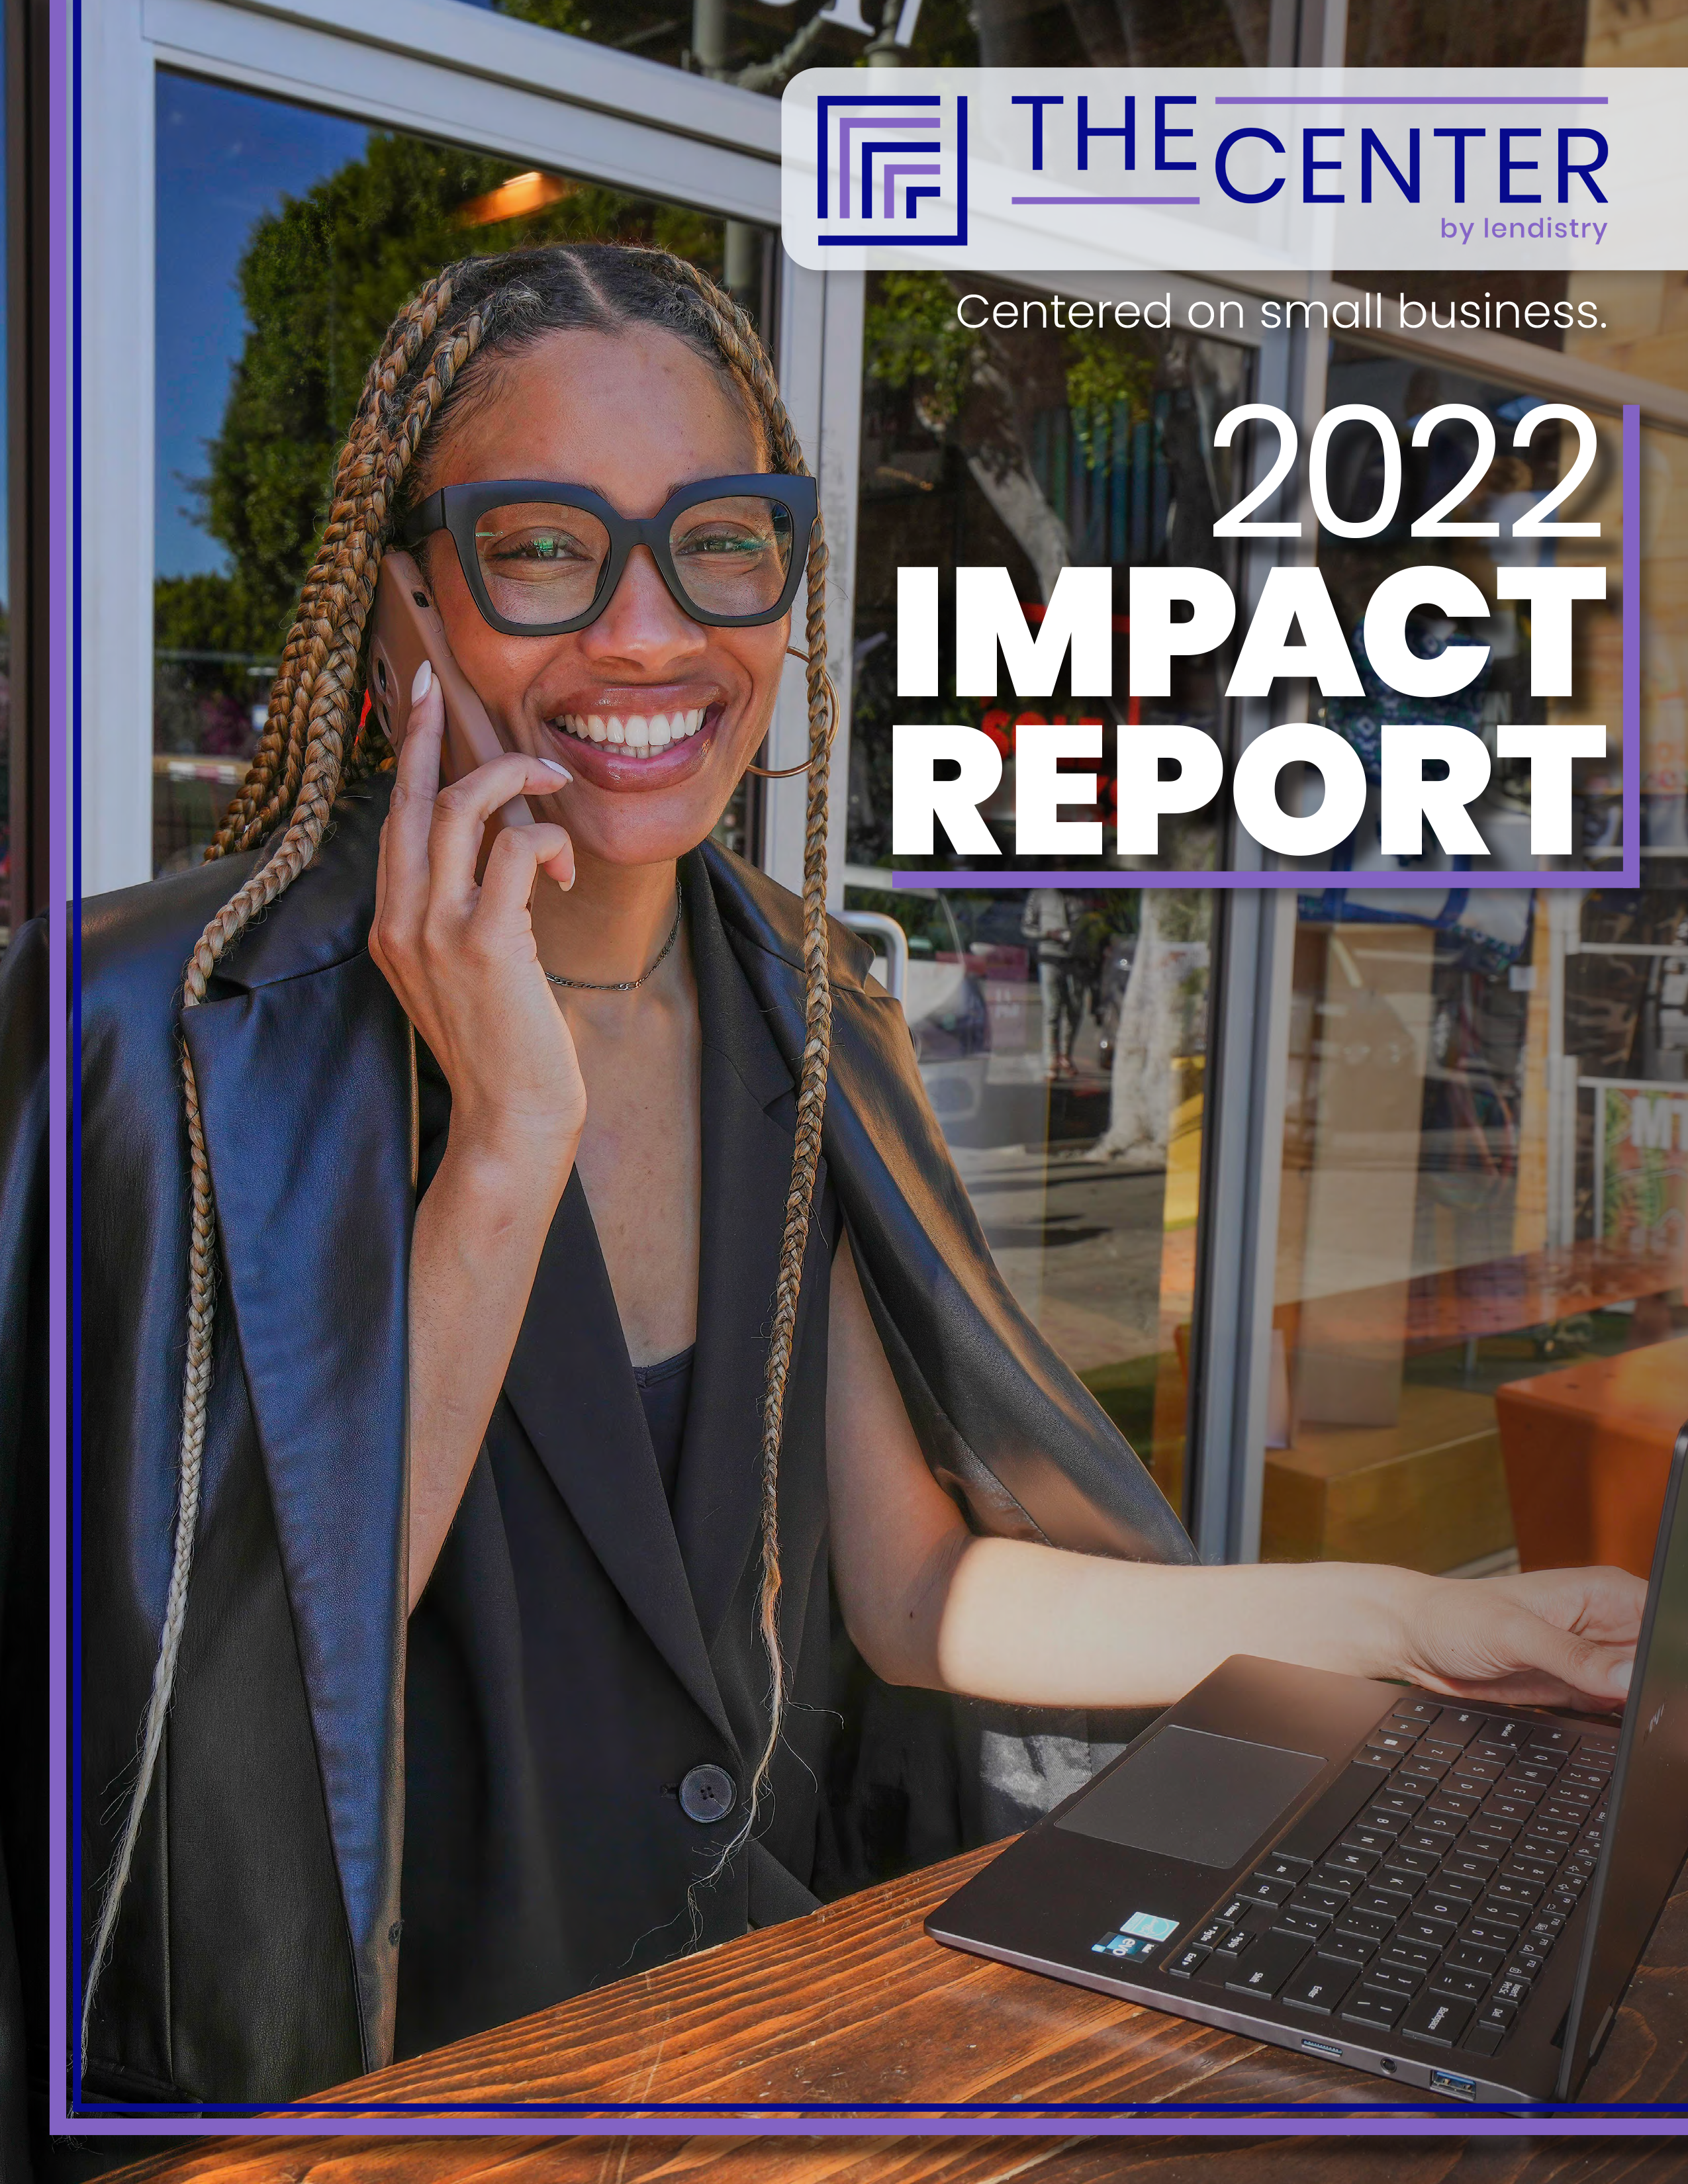 Lendistry 2022 Impact Report Cover